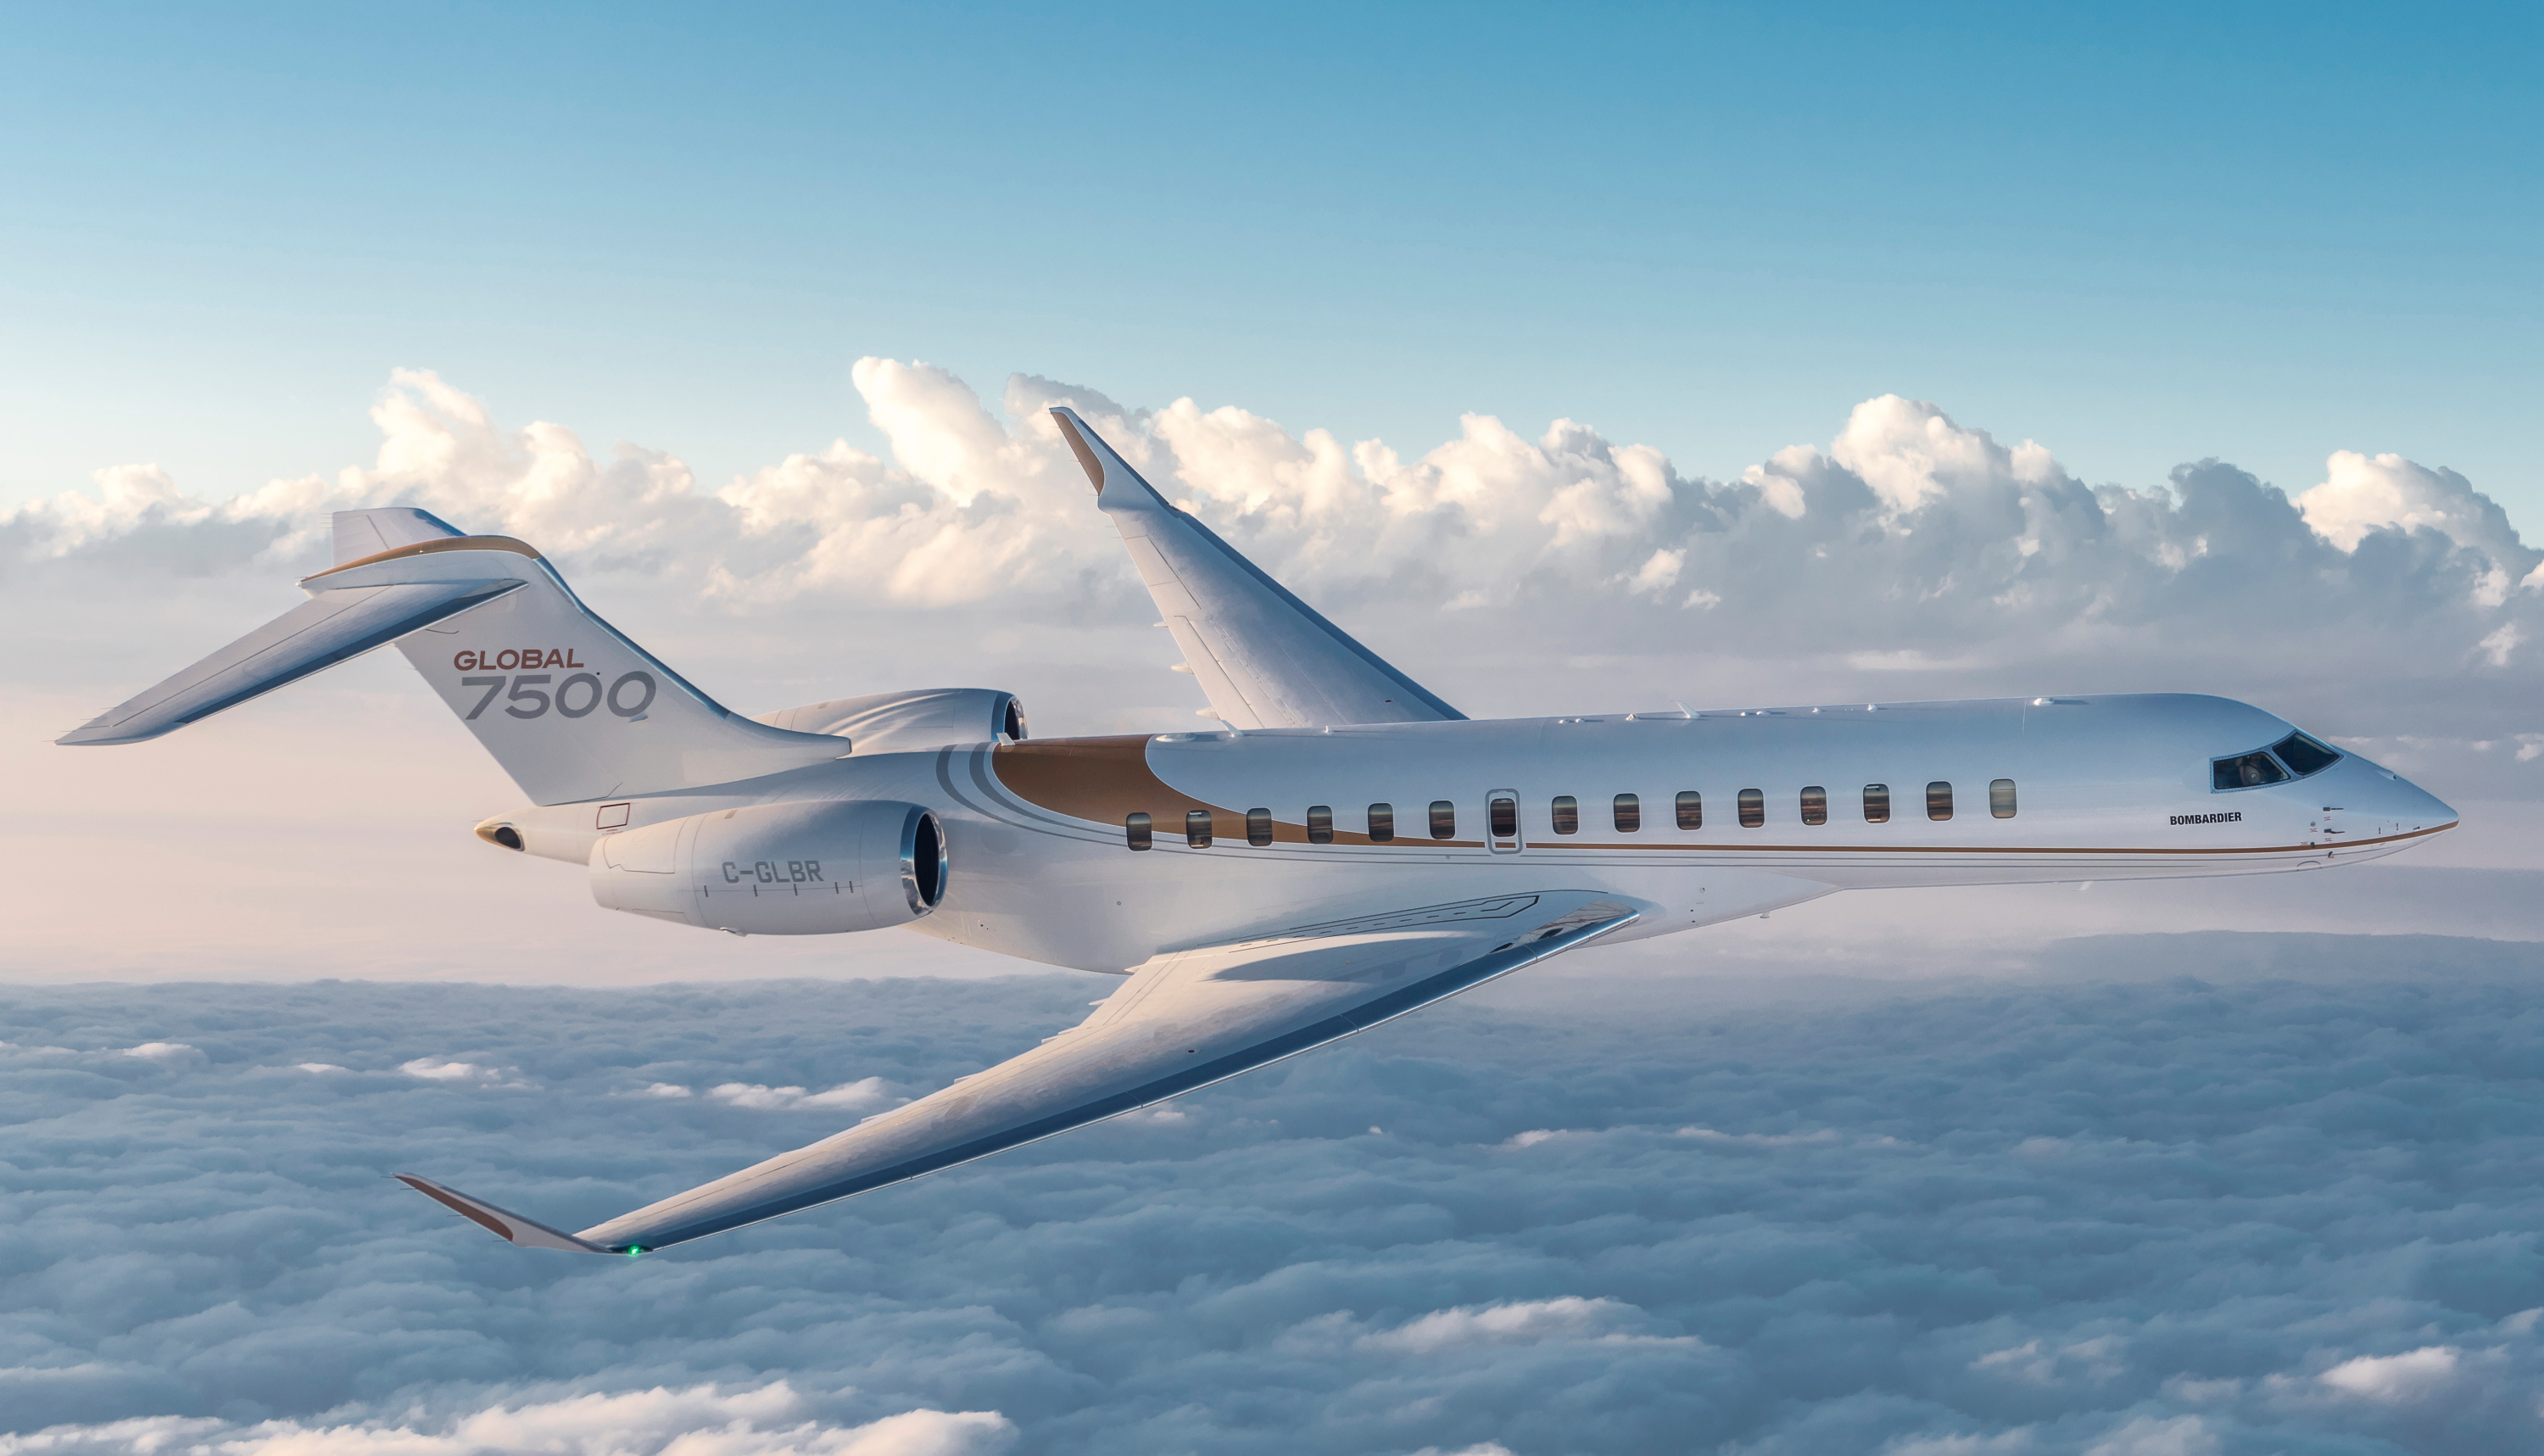 Bombardier’s Global 7500 Business Jet. Click to enlarge.